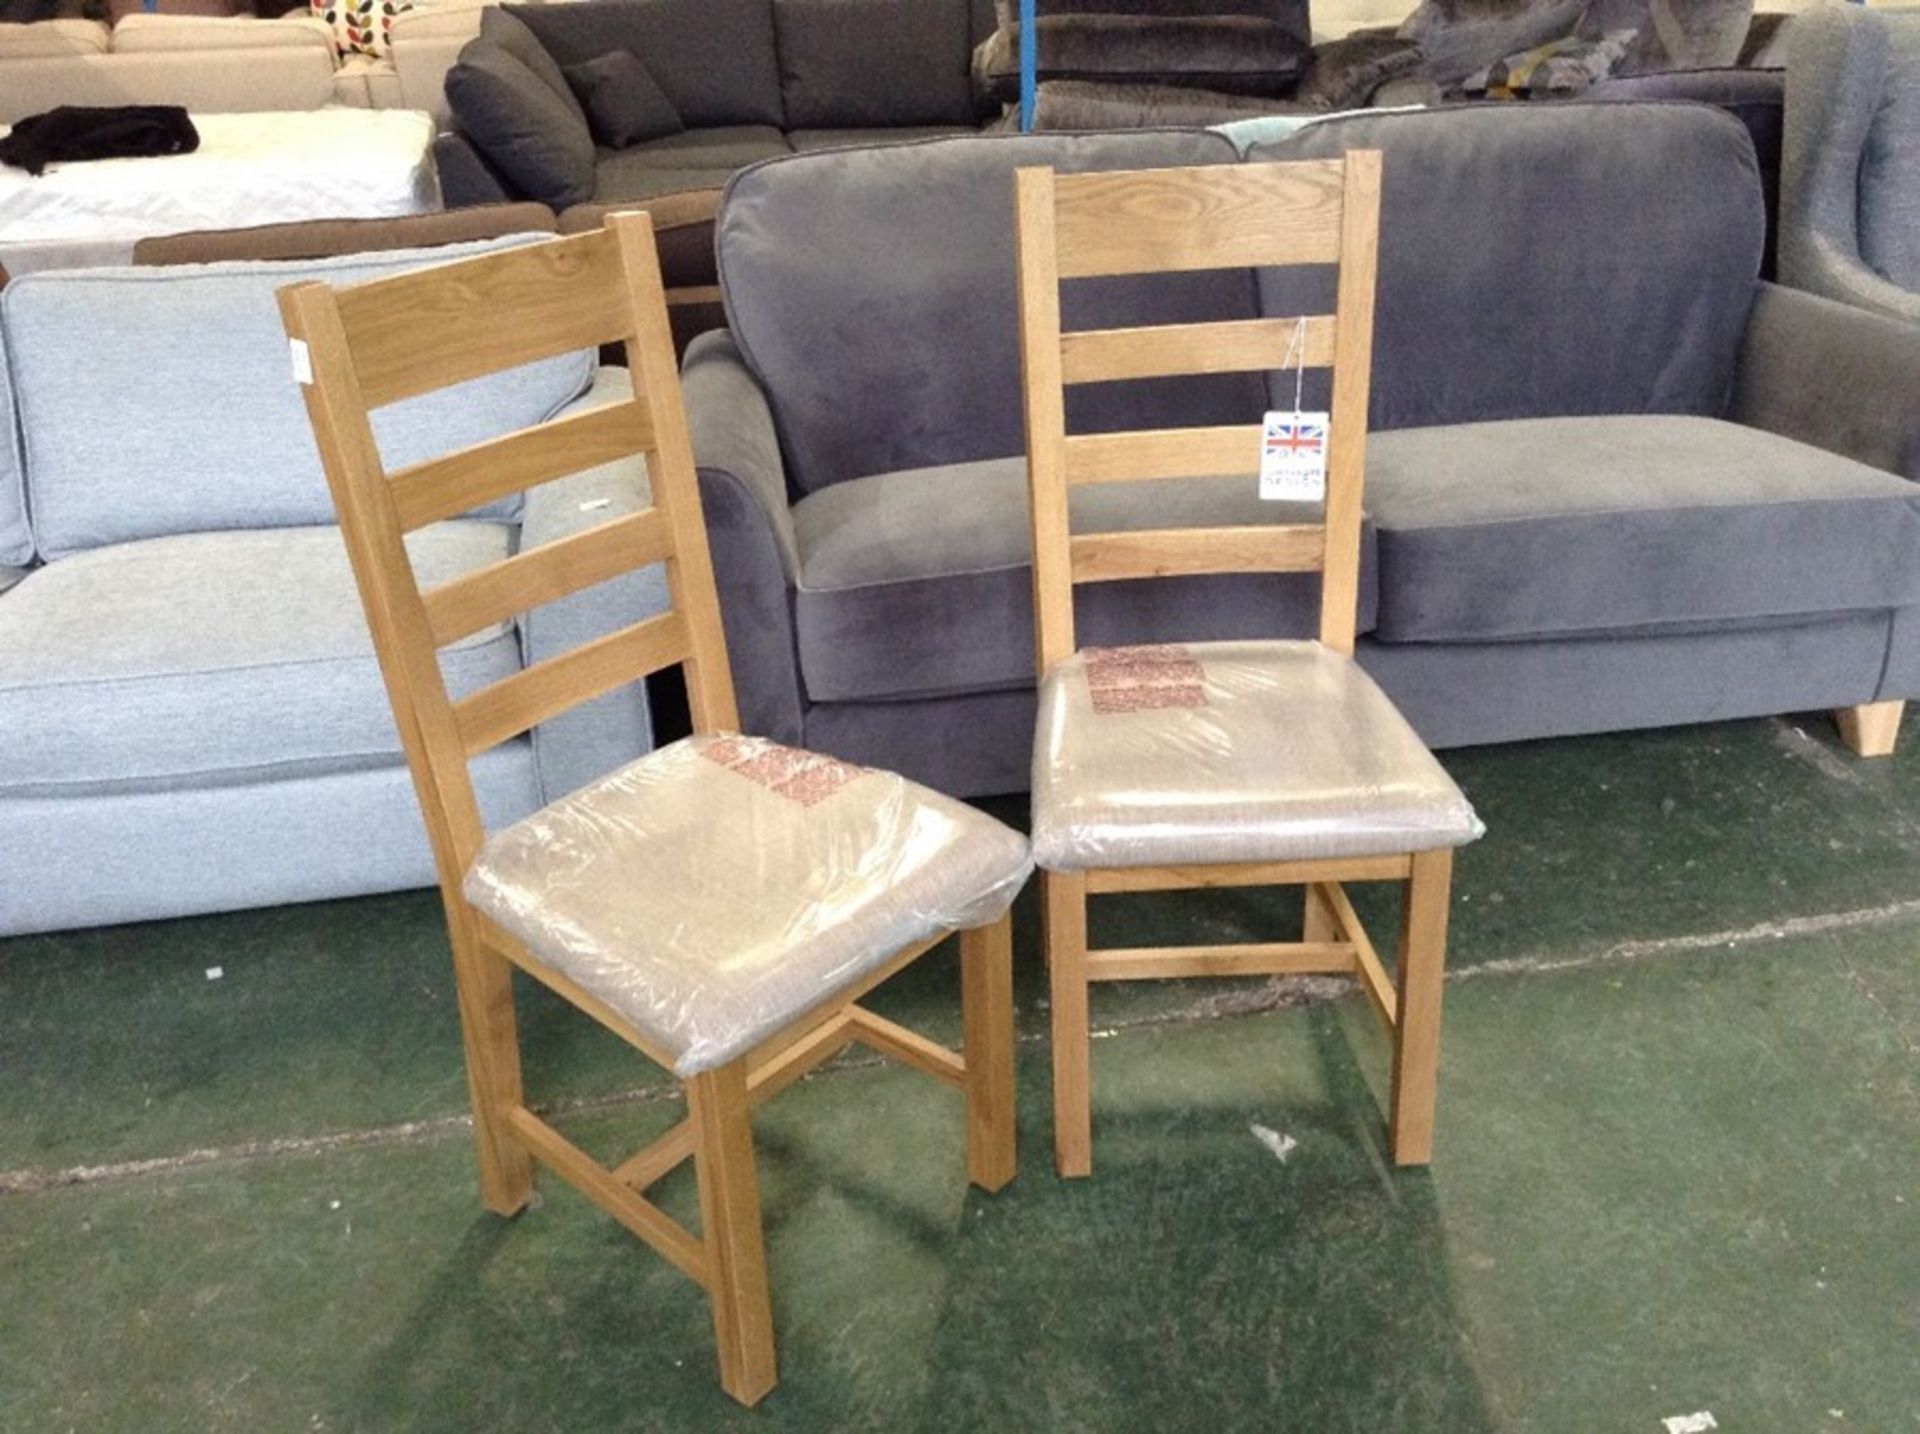 Union Rustic,Frederickson Solid Wood Dining Chair (Set of 2) (21223/7 -WLDK1108)